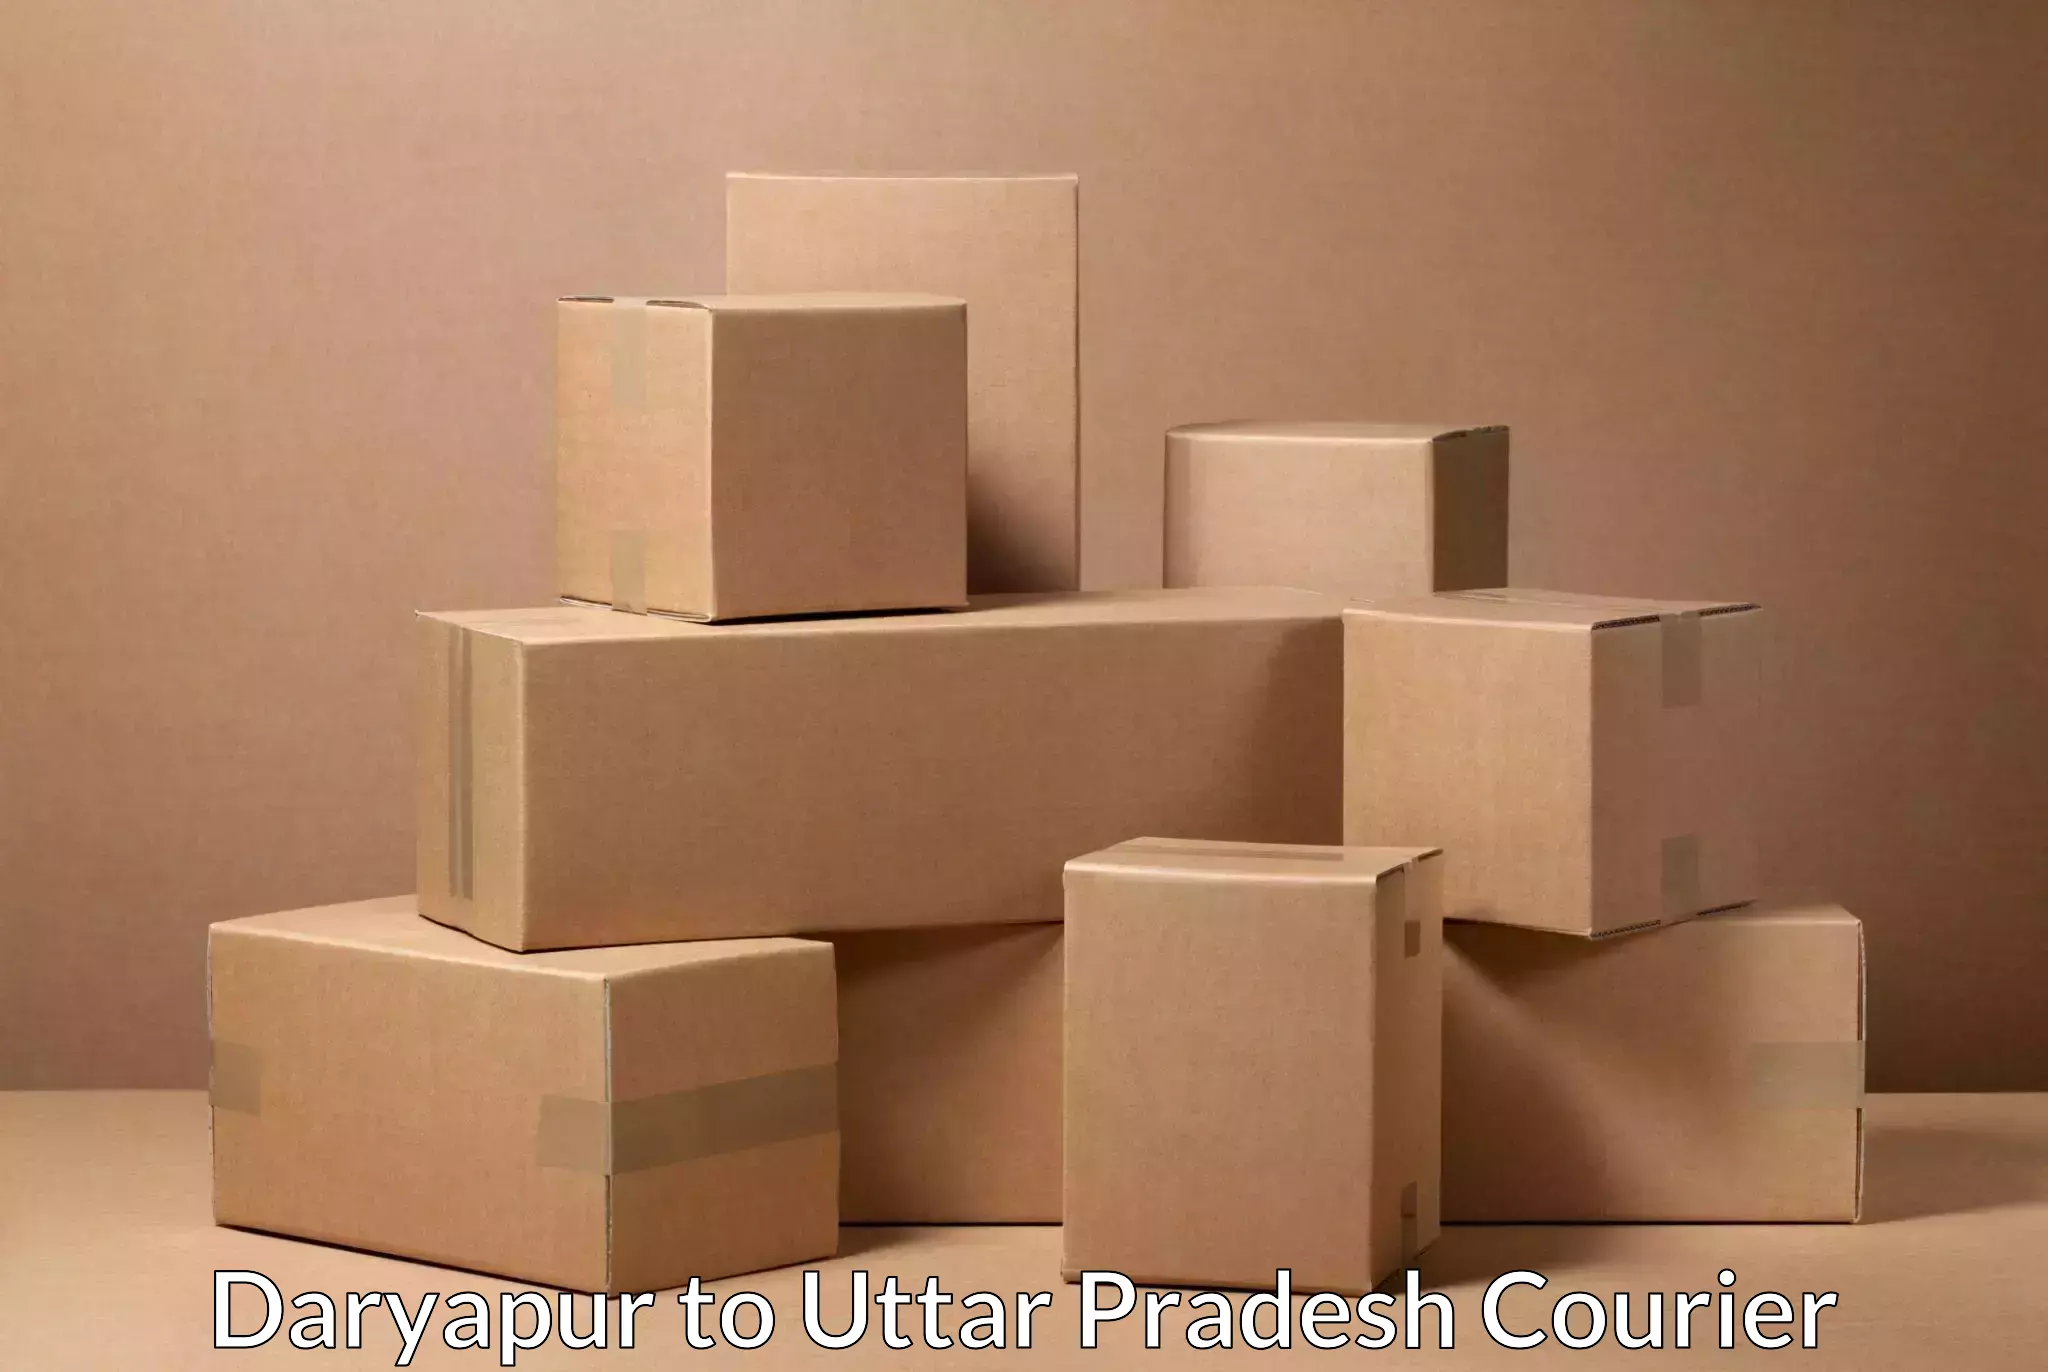 Efficient courier operations Daryapur to Agra